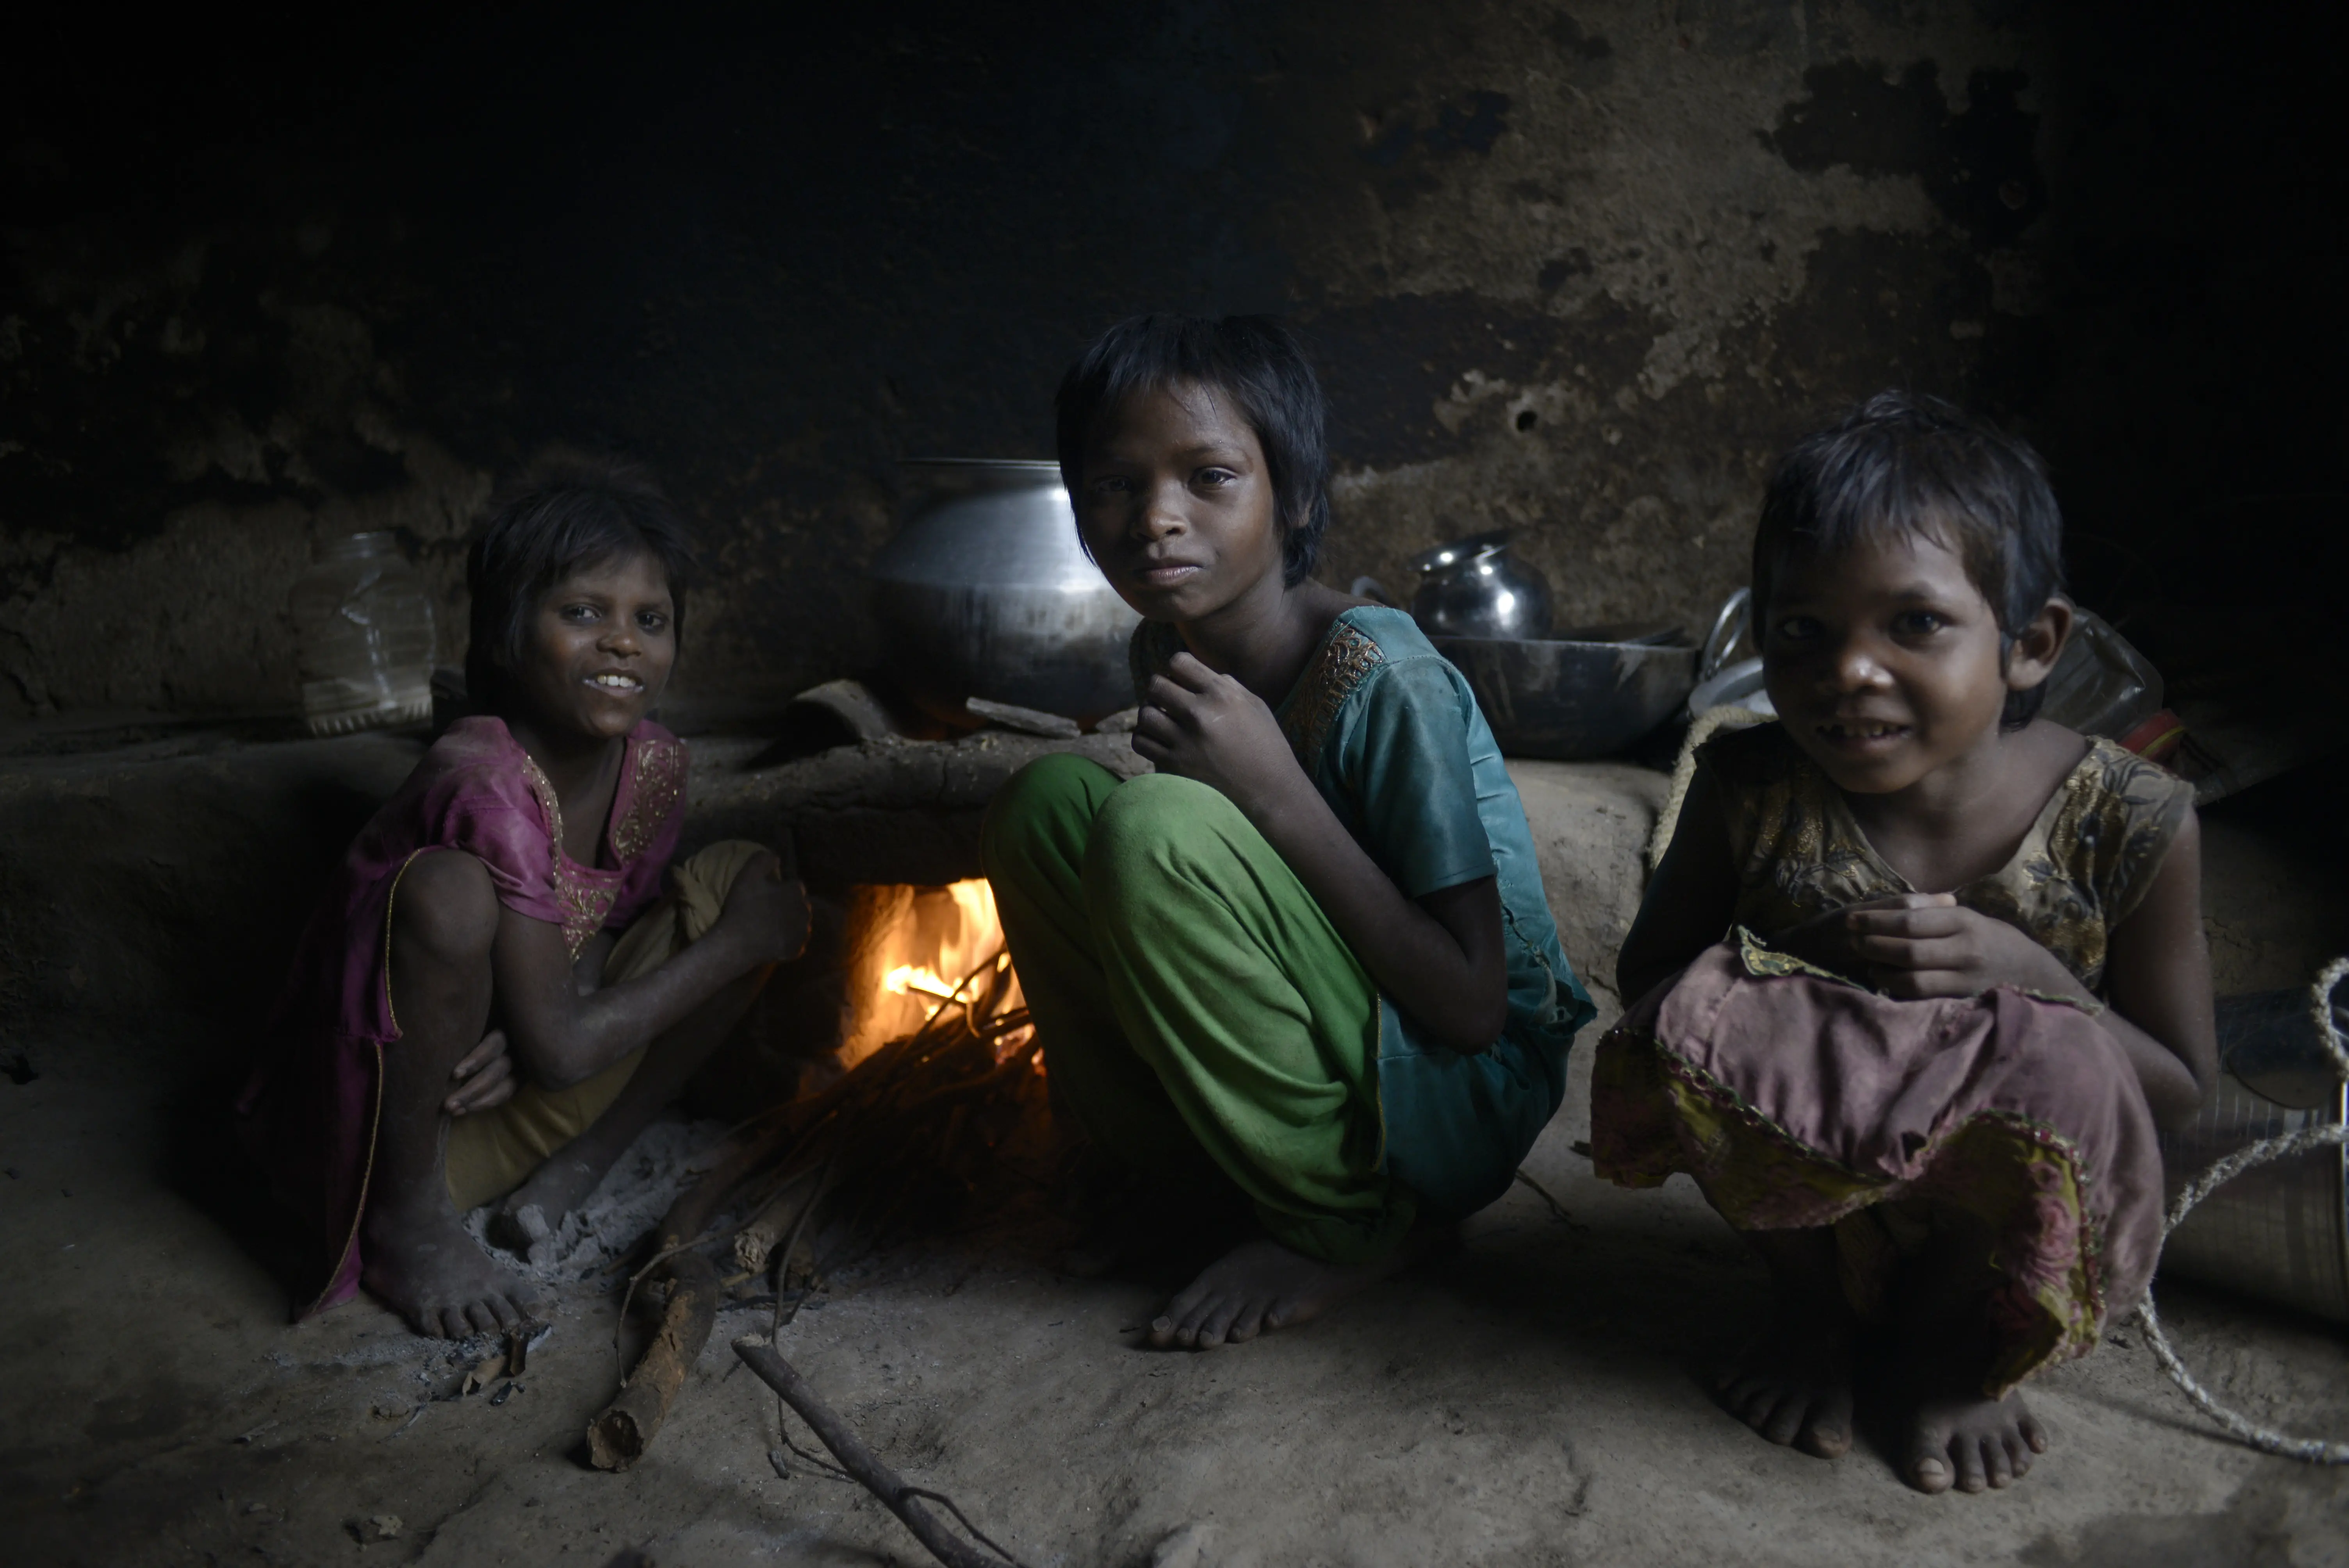 Three young children sit together around a fire